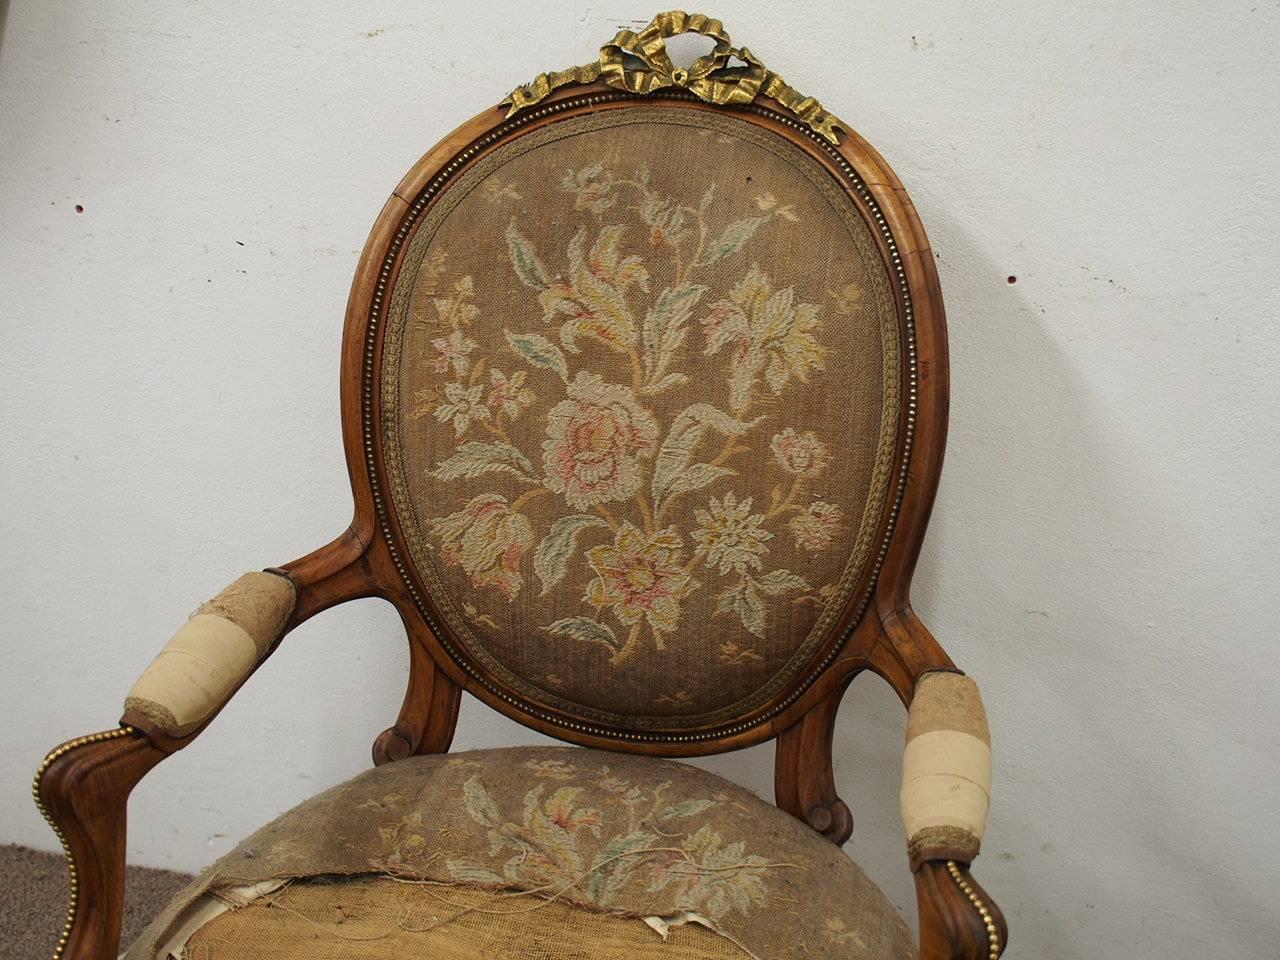 Exhibition quality French ormolu mounted walnut armchair (fauteuil), circa 1860. With a label of “Jeansleme Pere et Fils” (worked 1853-1861). The fluted oval back with beaded ormolu decorations is surmounted by an elaborate ormolu ribbon bow. It has